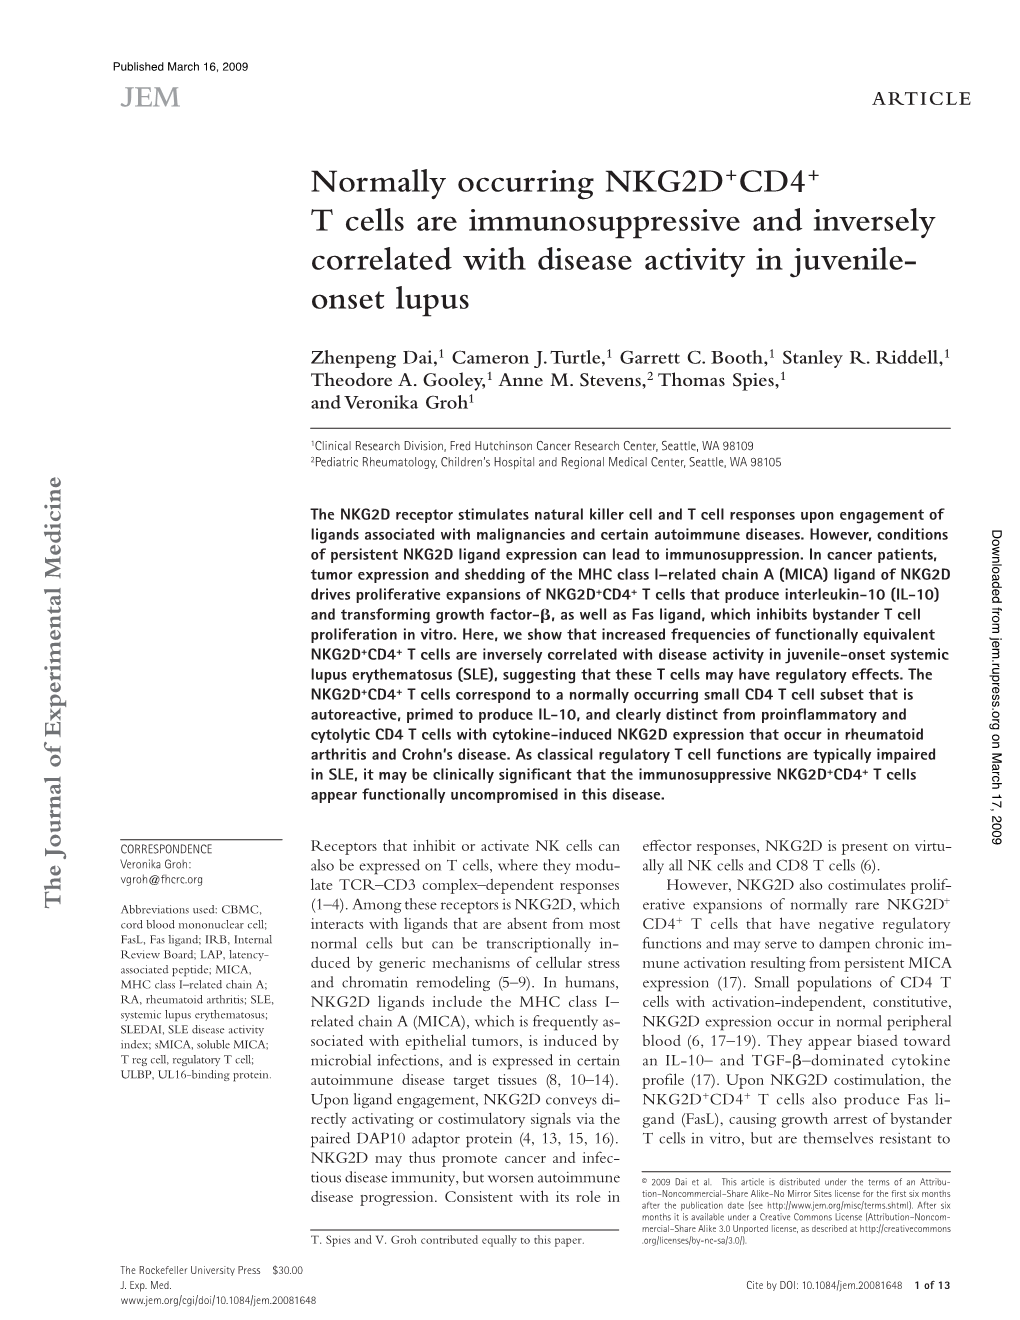 Normally Occurring NKG2D +CD4 + T Cells Are Immunosuppressive And